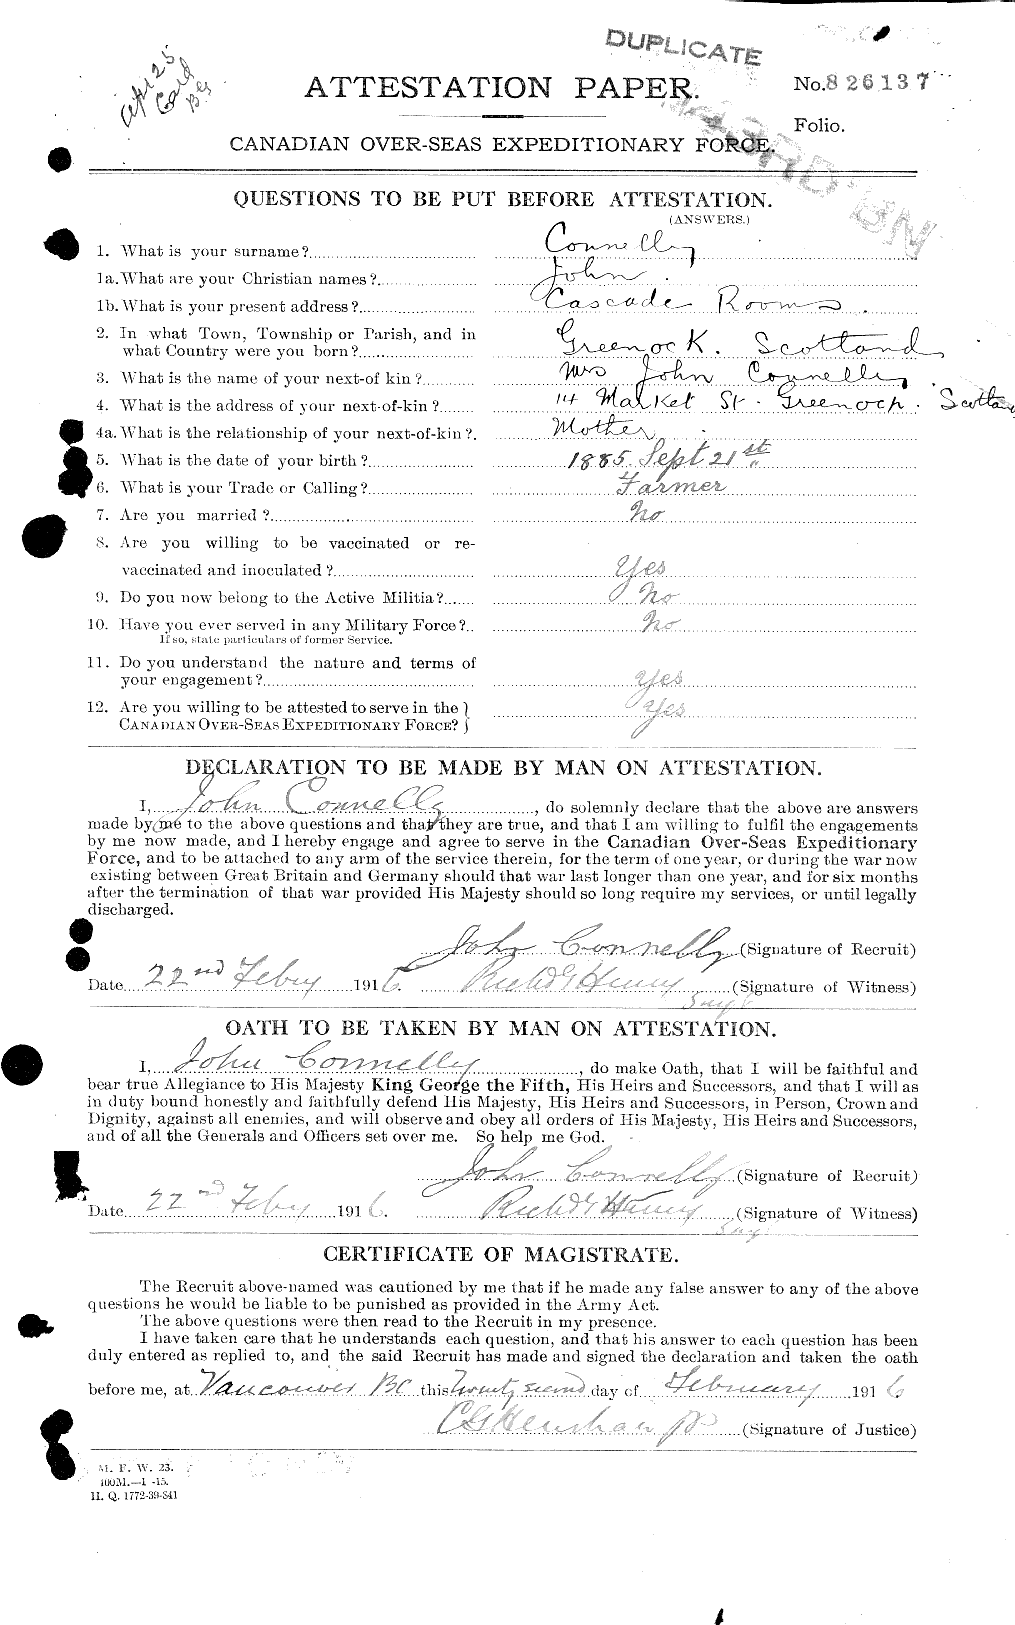 Personnel Records of the First World War - CEF 035984a